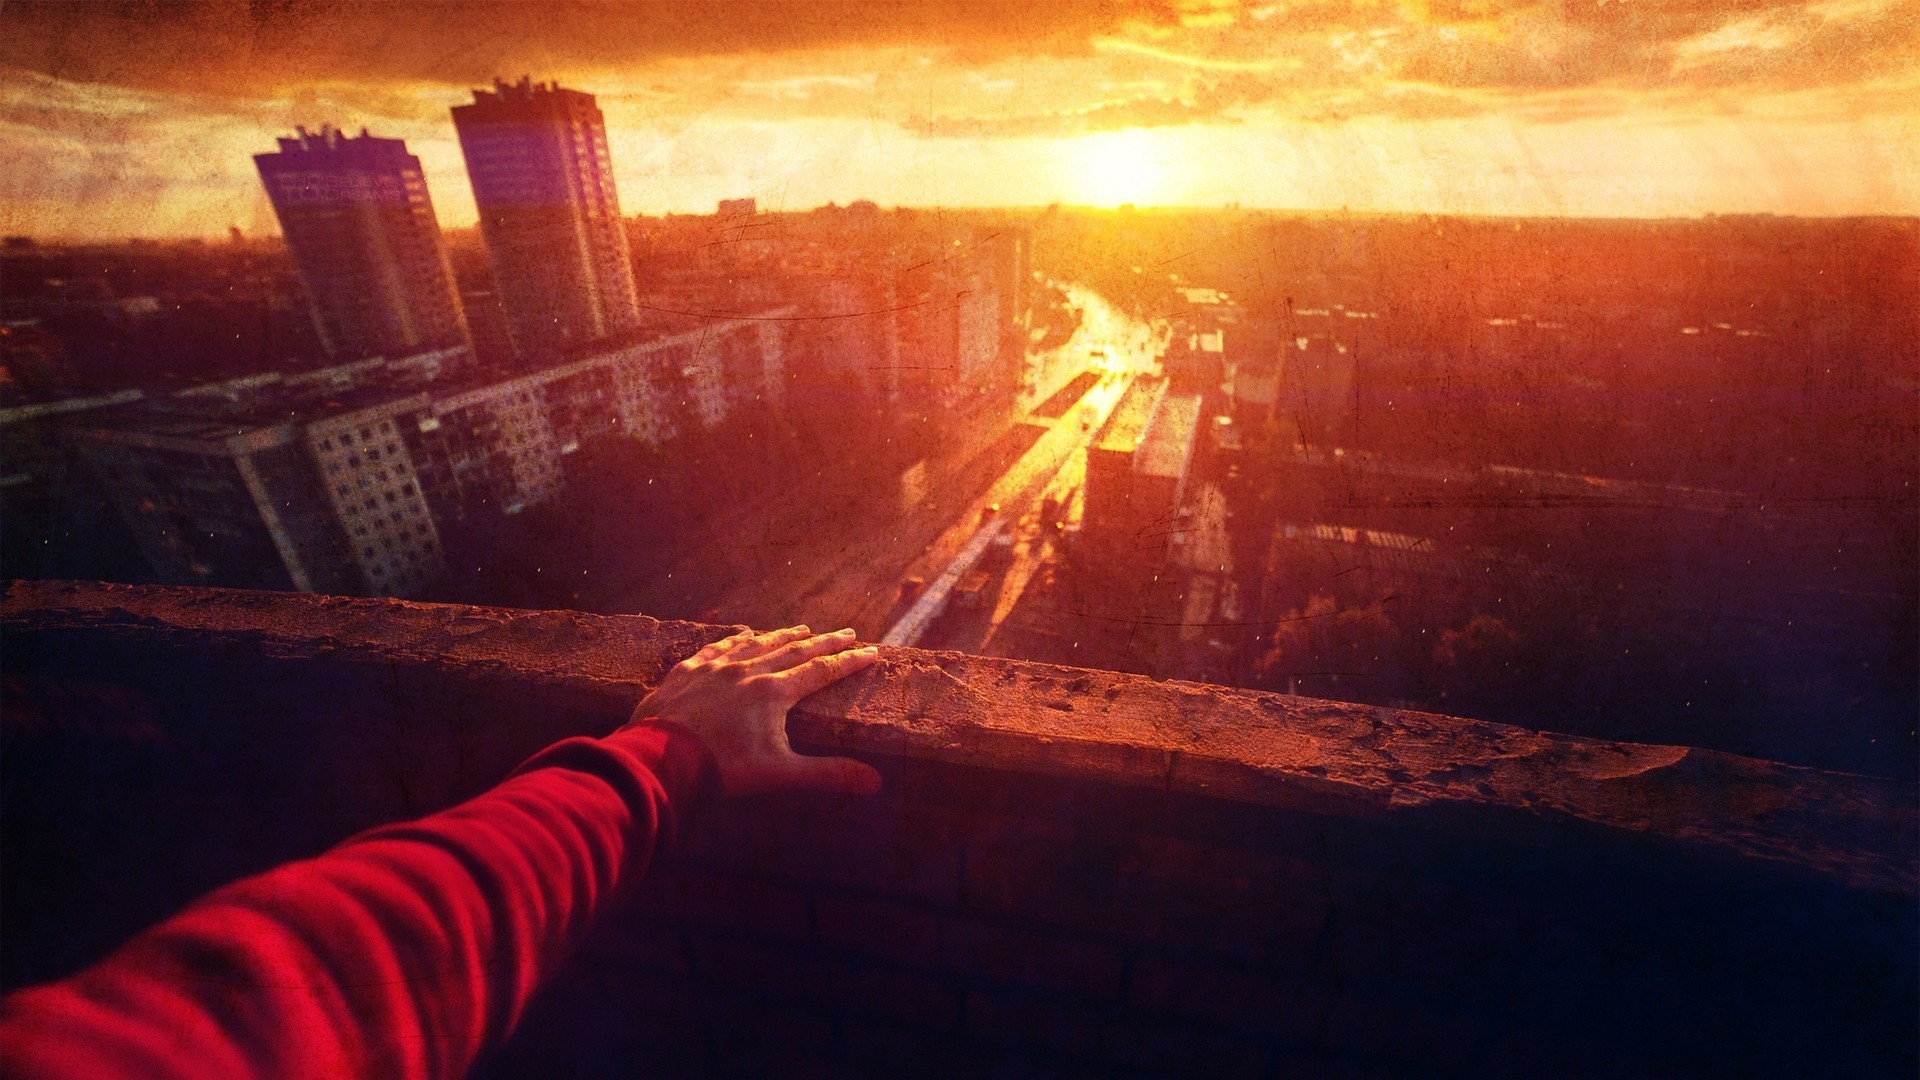 HDR Sunset Building Hands Cityscape Sunlight Arms People 1920x1080